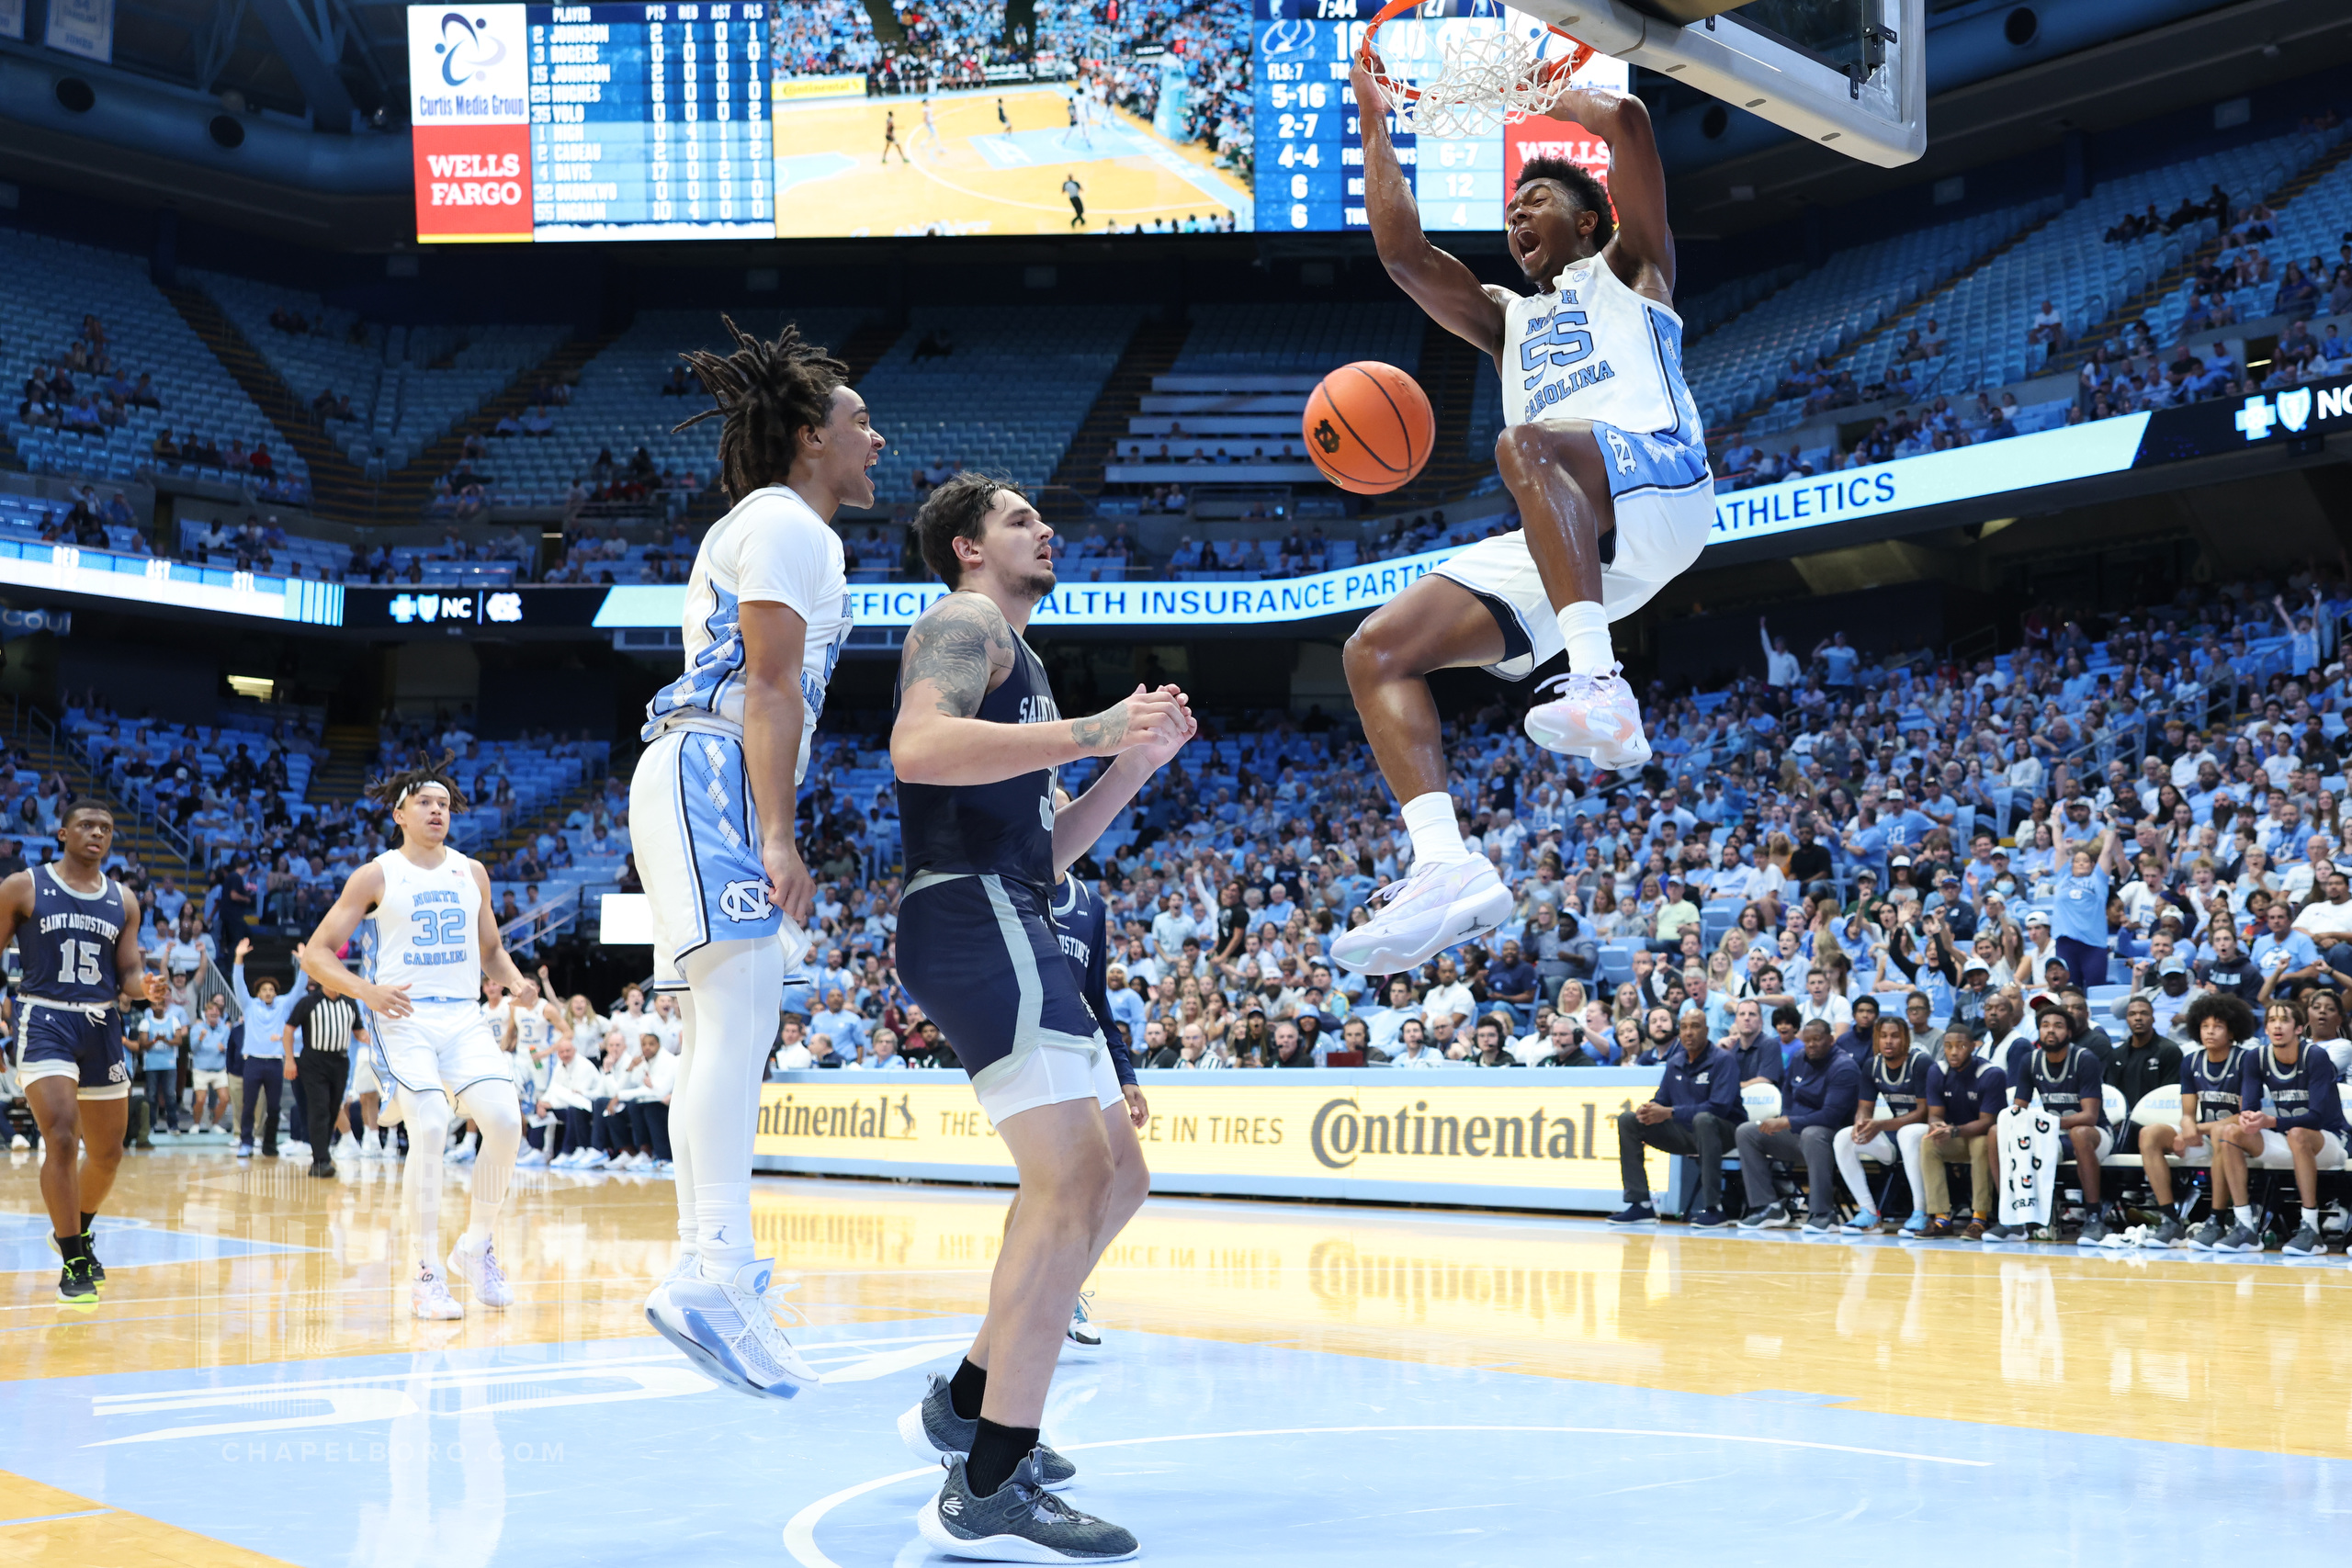 UNC Men's Basketball Hoping Revamped Roster, New Identity Buries Last Season's Disappointment - Chapelboro.com